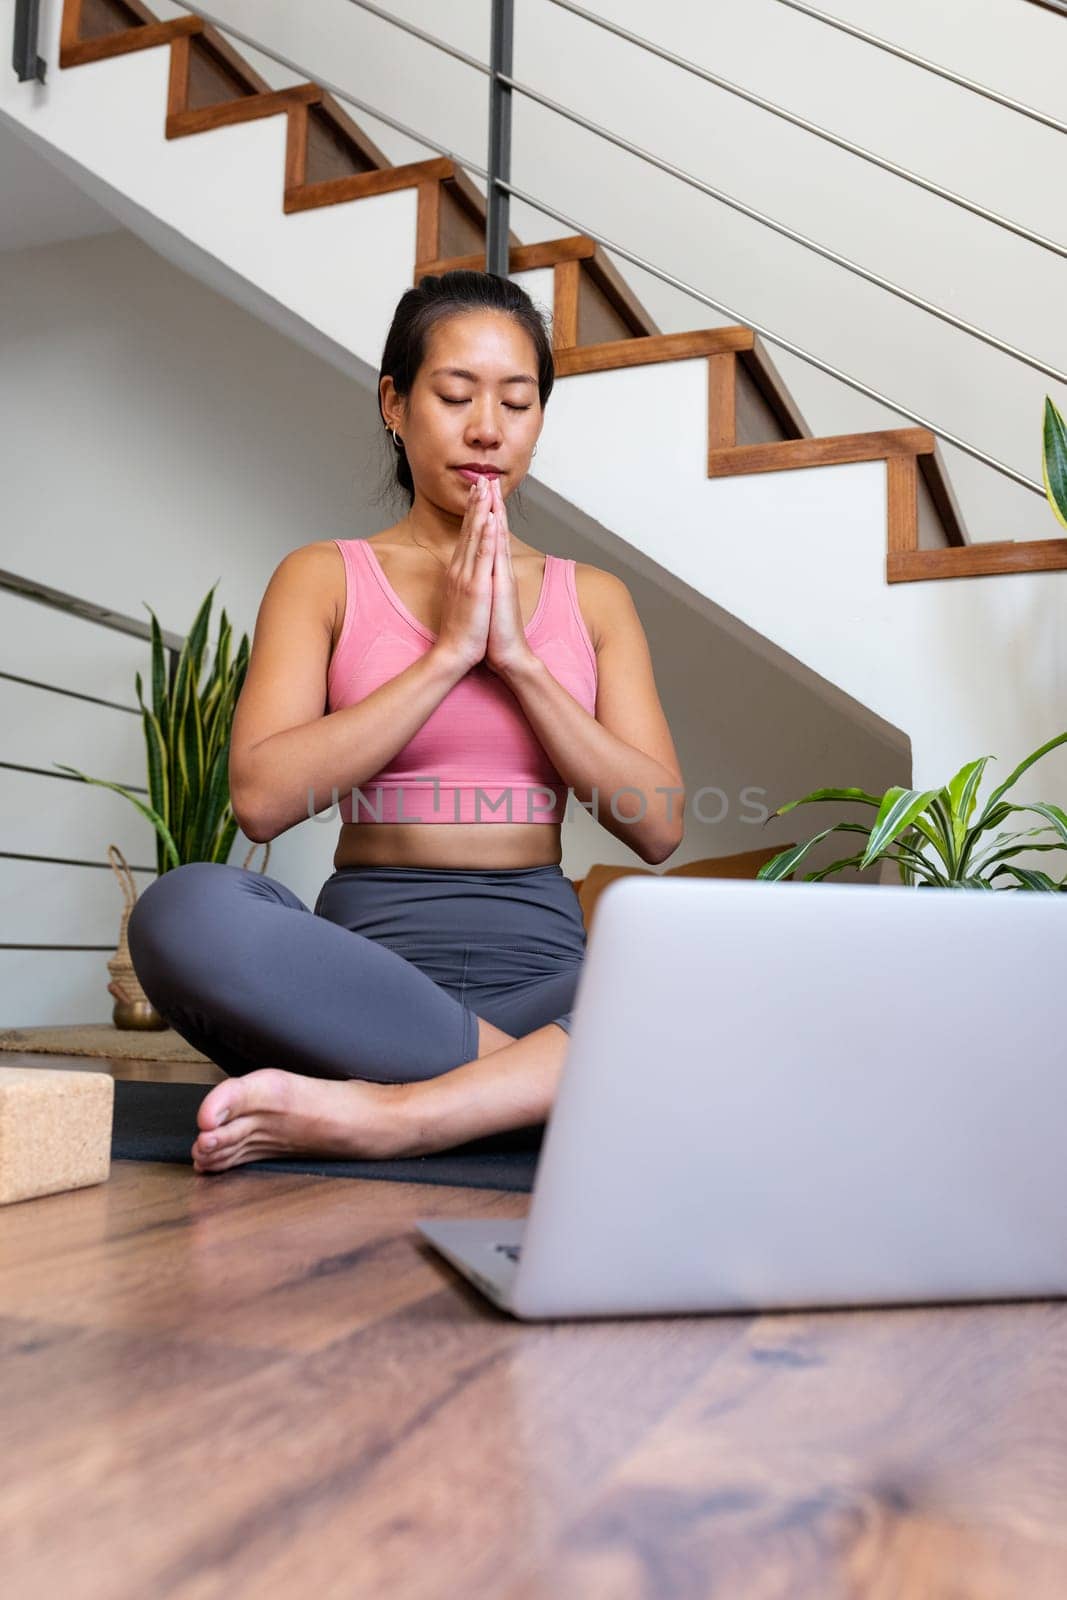 Vertical portrait of Asian woman doing online meditation with hands in prayer at home sitting on yoga mat using laptop by Hoverstock